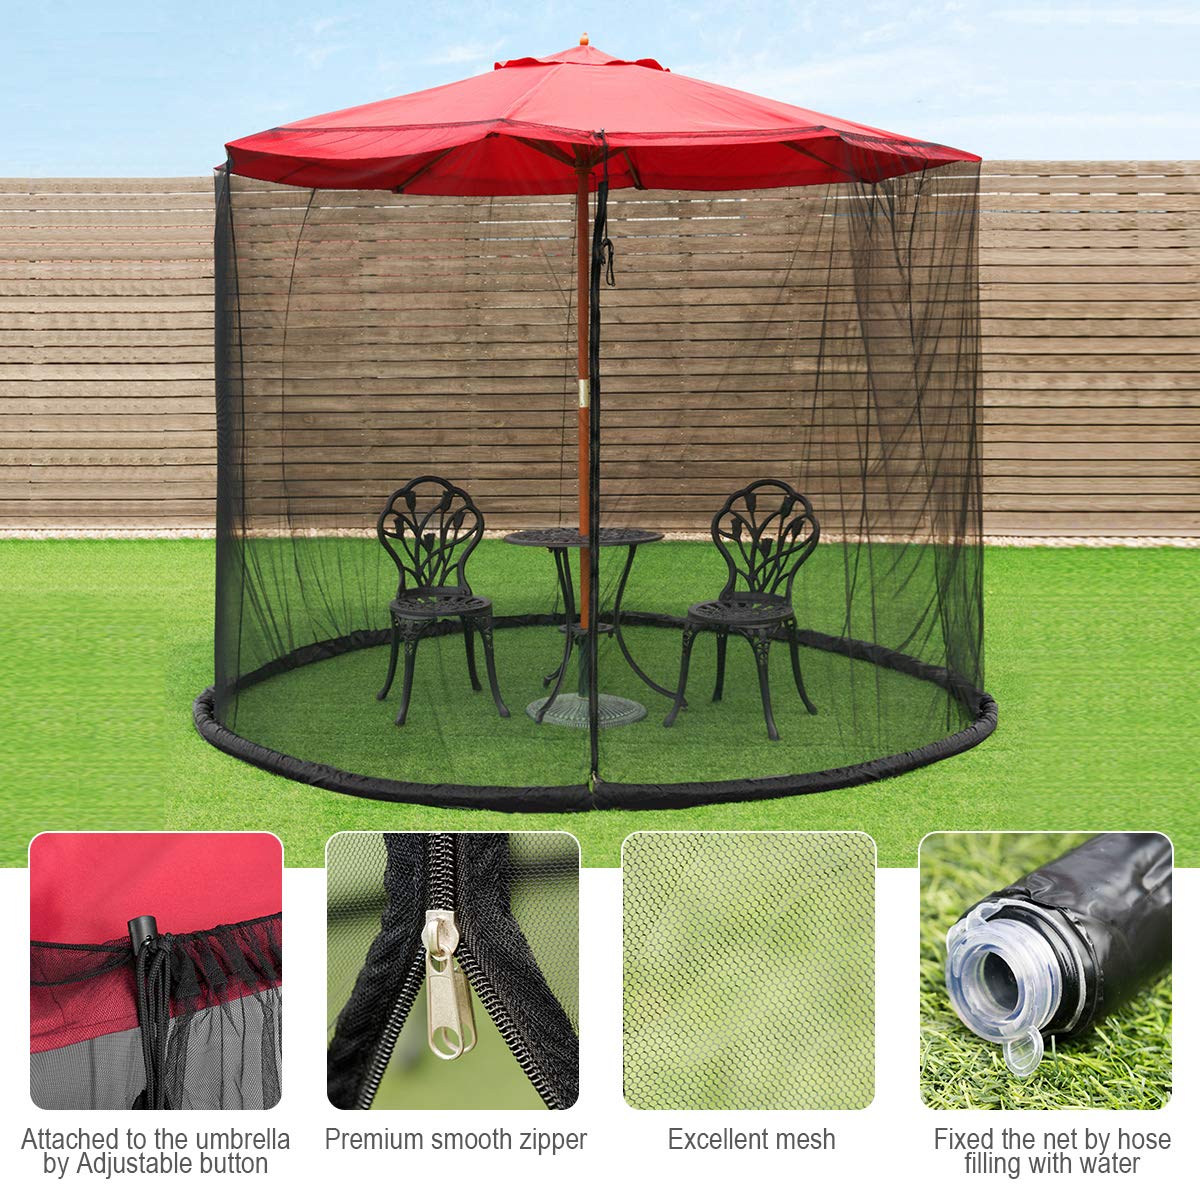 Round can be customized Patio Umbrella Screen, with Zipper Door and Polyester Mesh Netting, Height and Diameter Adjustable, Suitable for Outdoor Patio Camping Umbrella